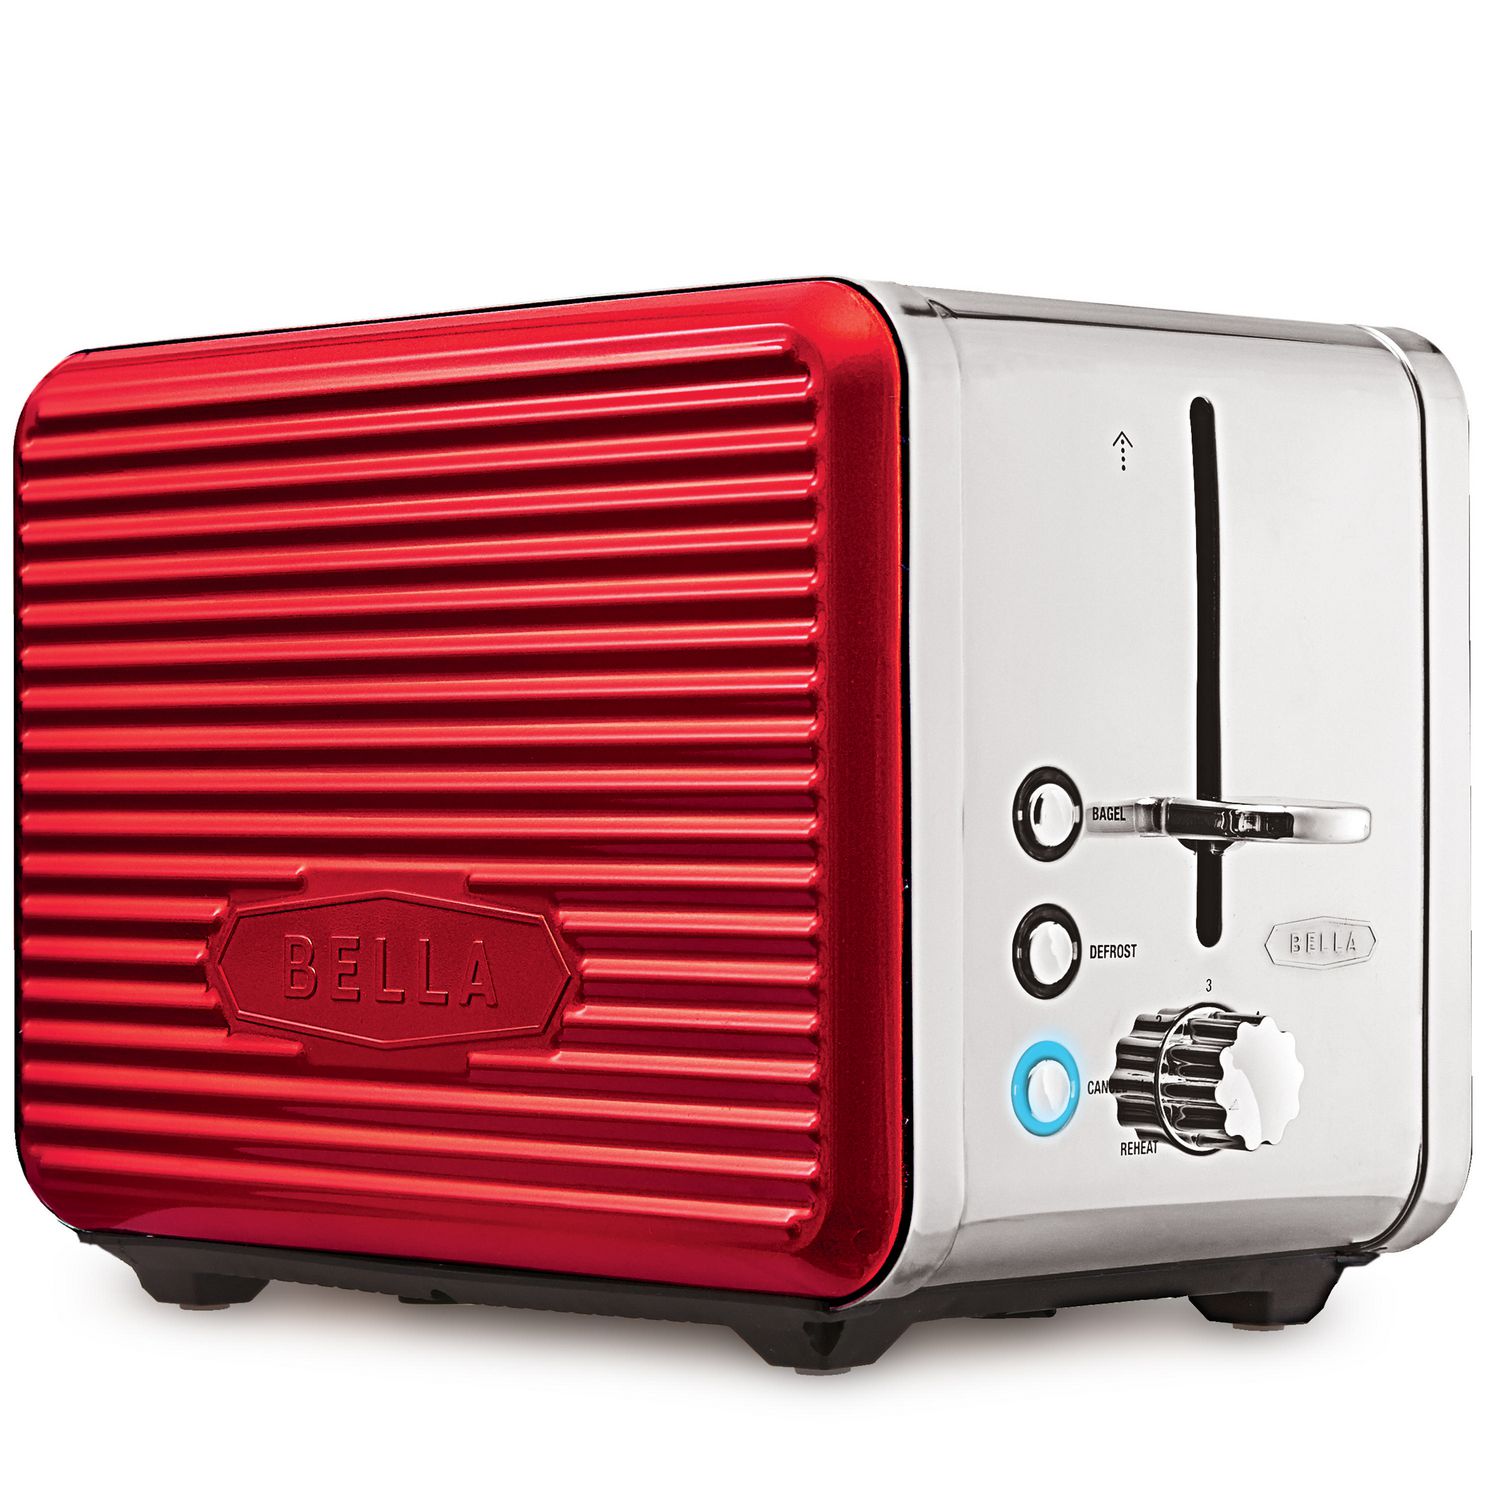 GRILLE-PAIN ROUGE 2 TRANCHES 825 WATTS SWAN RETRO